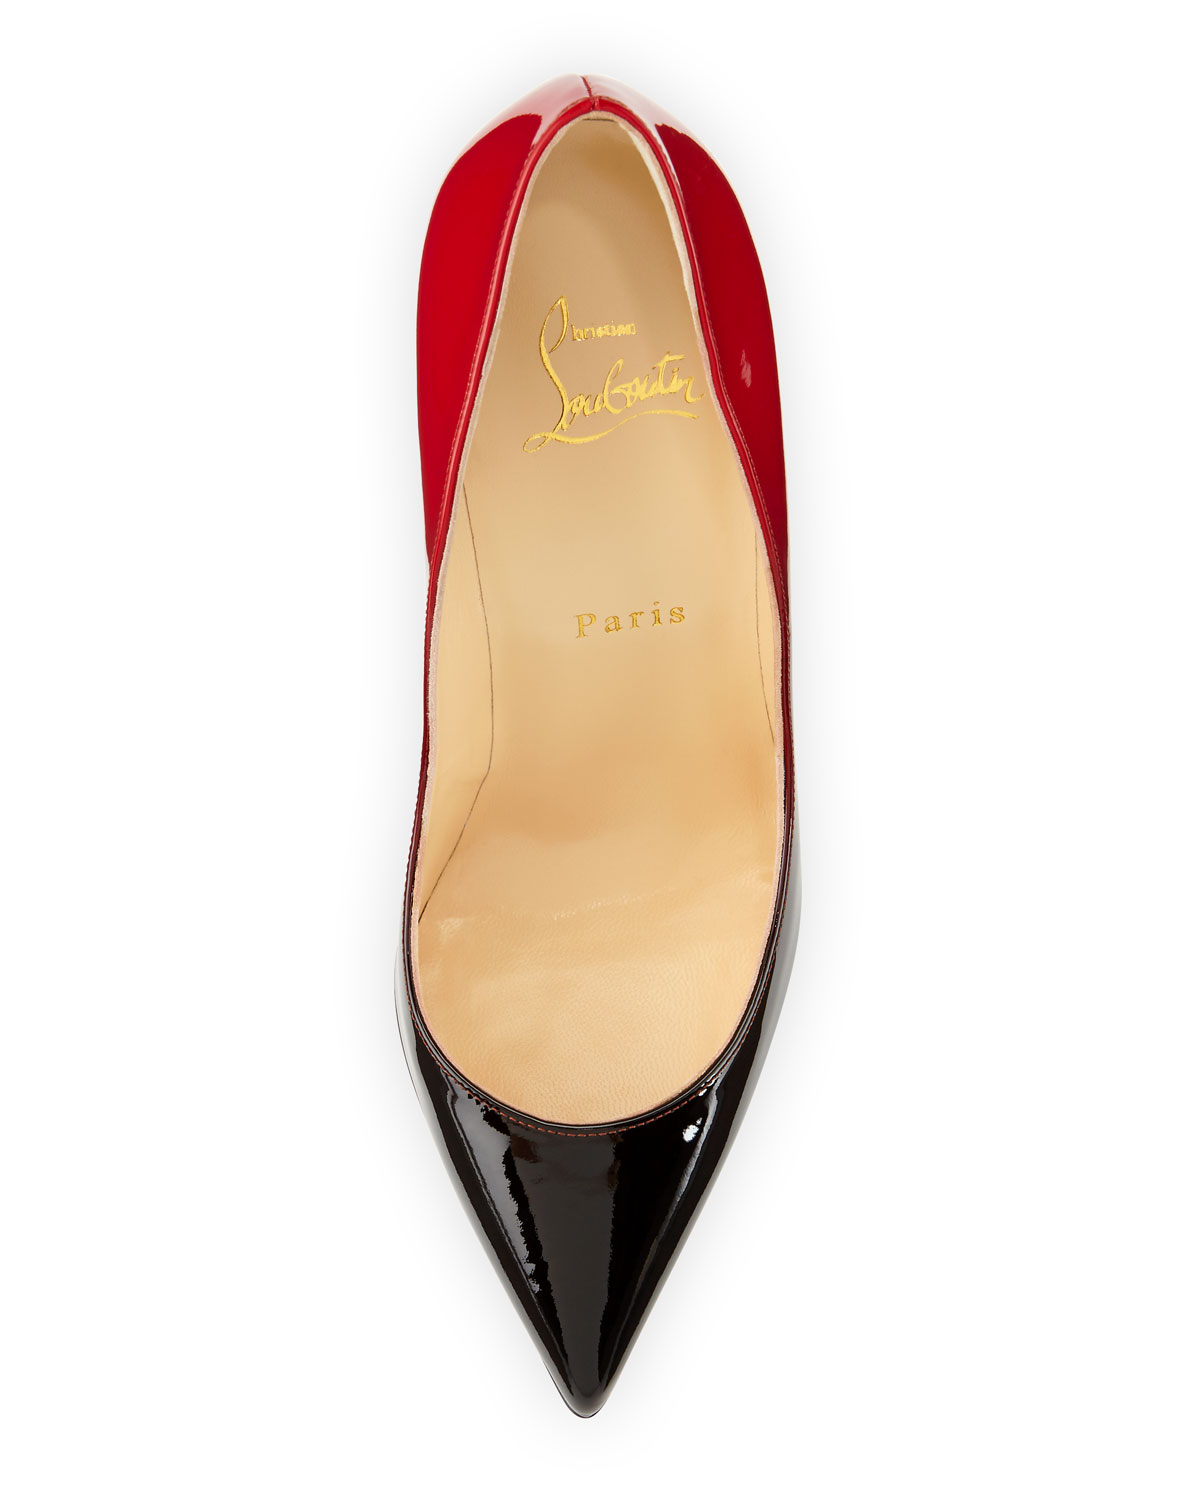 christian-louboutin-blackred-pigalle-follies-degrade-red-sole-pump-black-product-1-108970572-normal.jpeg